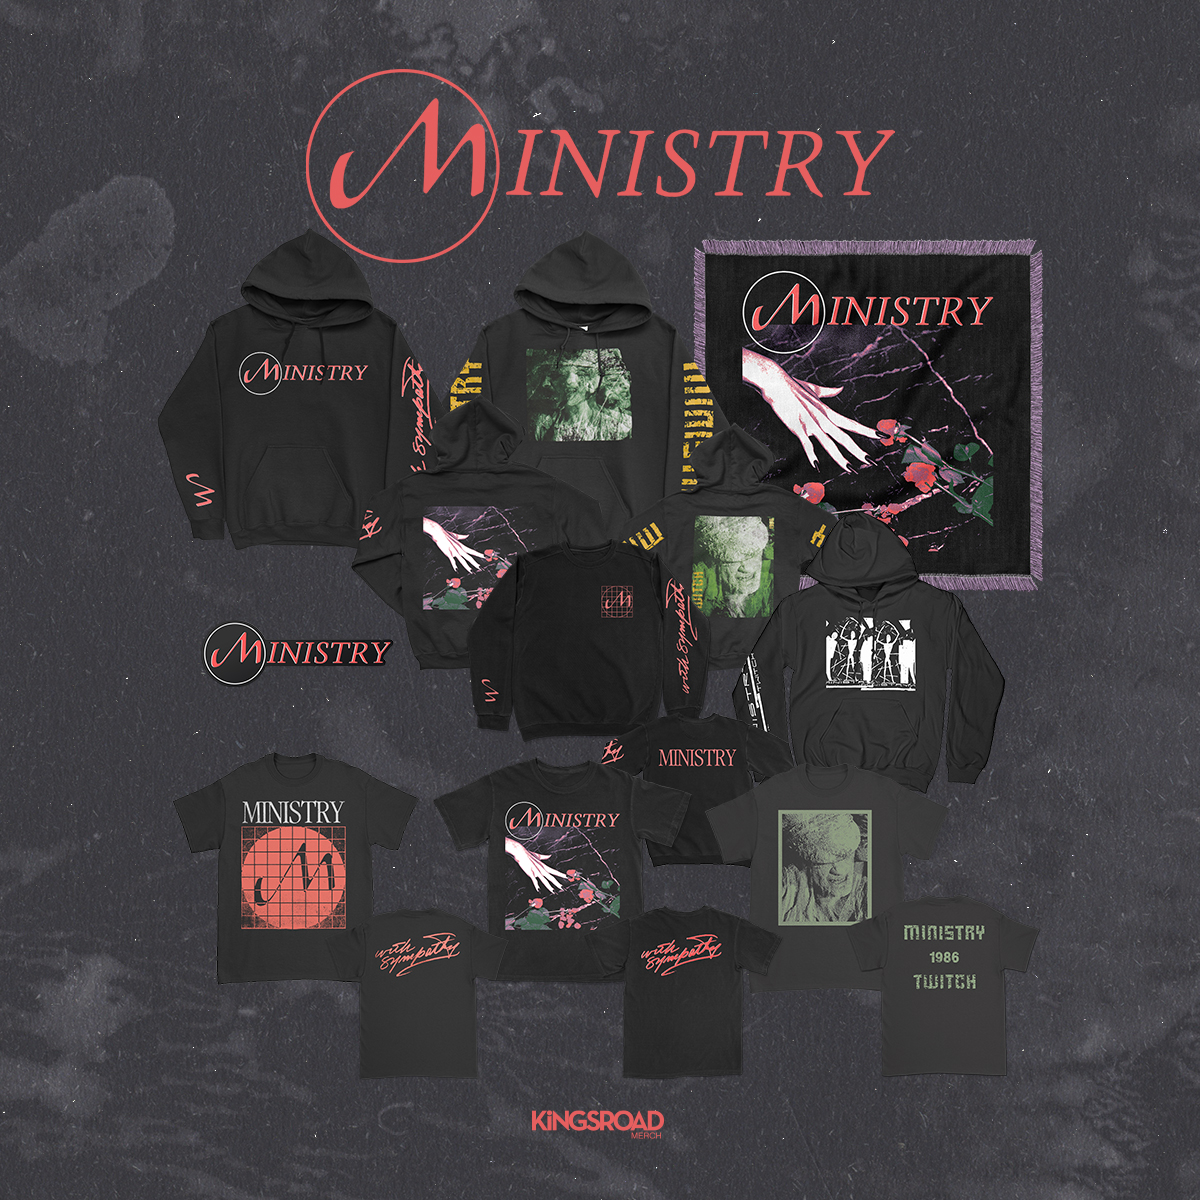 Get your MINISTRY🌹With Sympathy & Twitch👽 merch! ministryofficial.store #MinistryBand #WeAreMinistry #Ministry #AlJourgensen #Merch #Kingsroad #EverydayIsHalloween #WithSympathy #Twitch